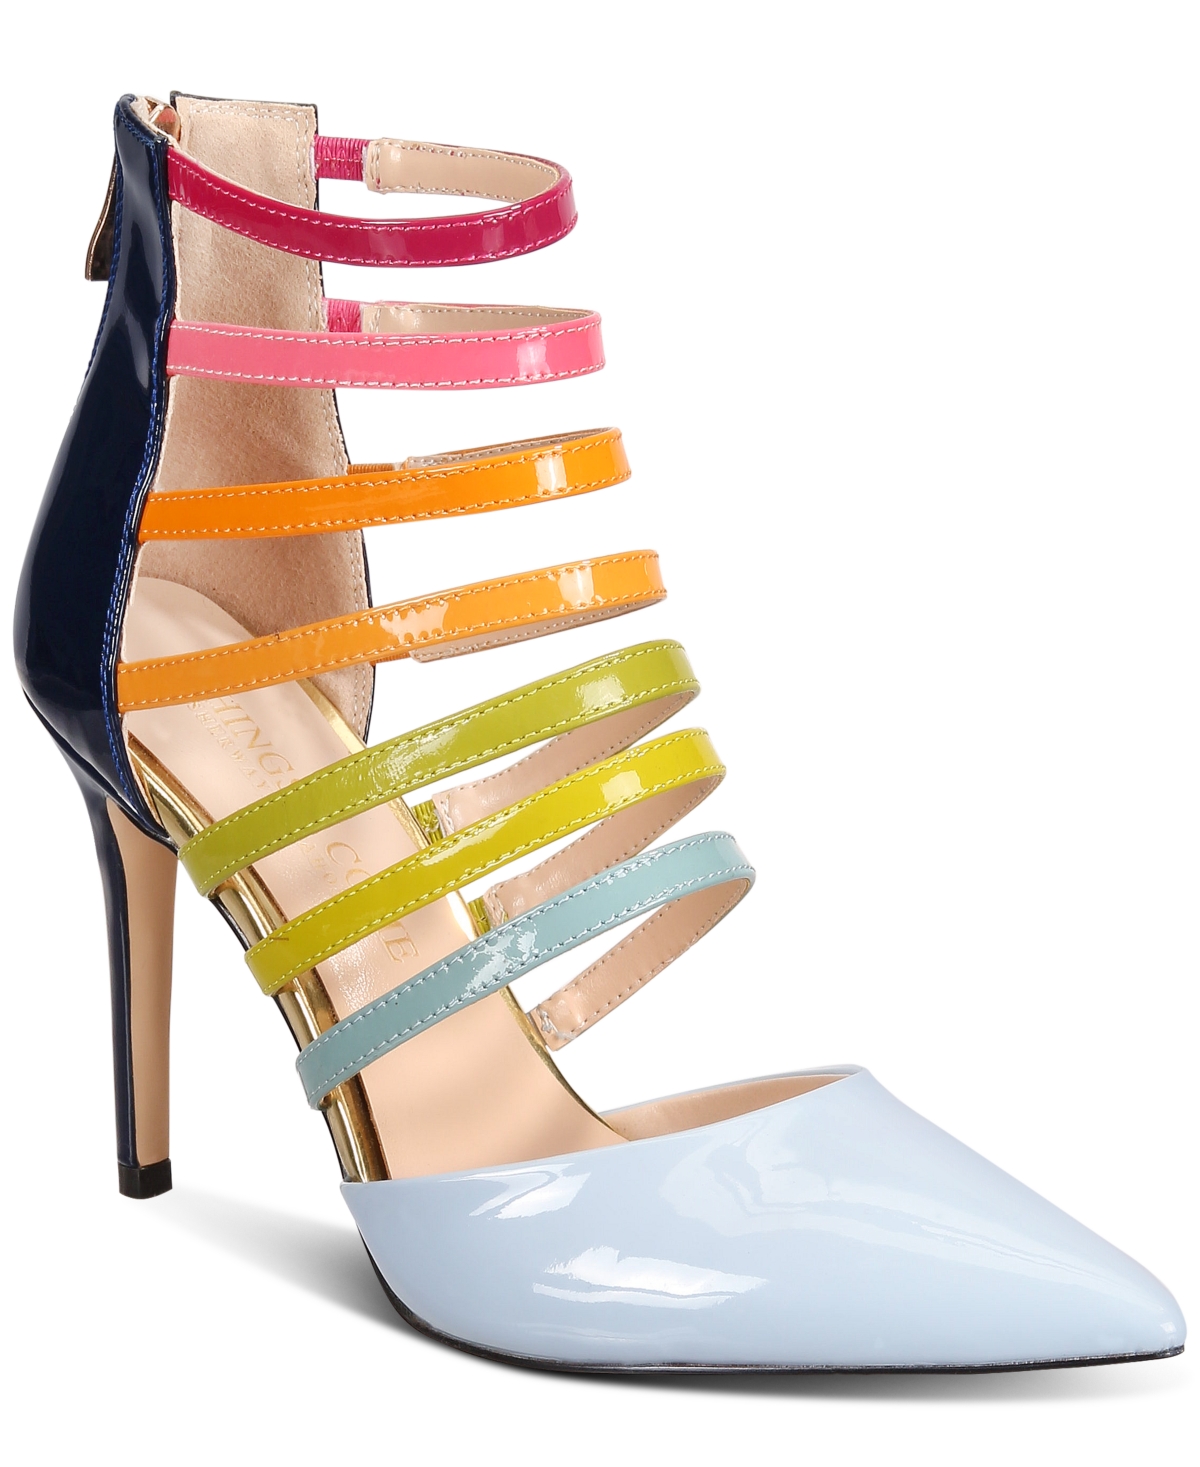 Things Ii Come Women's Valentina Pointed-toe Strappy Cutout Pumps In Powder Blue Multi Vegan Patent